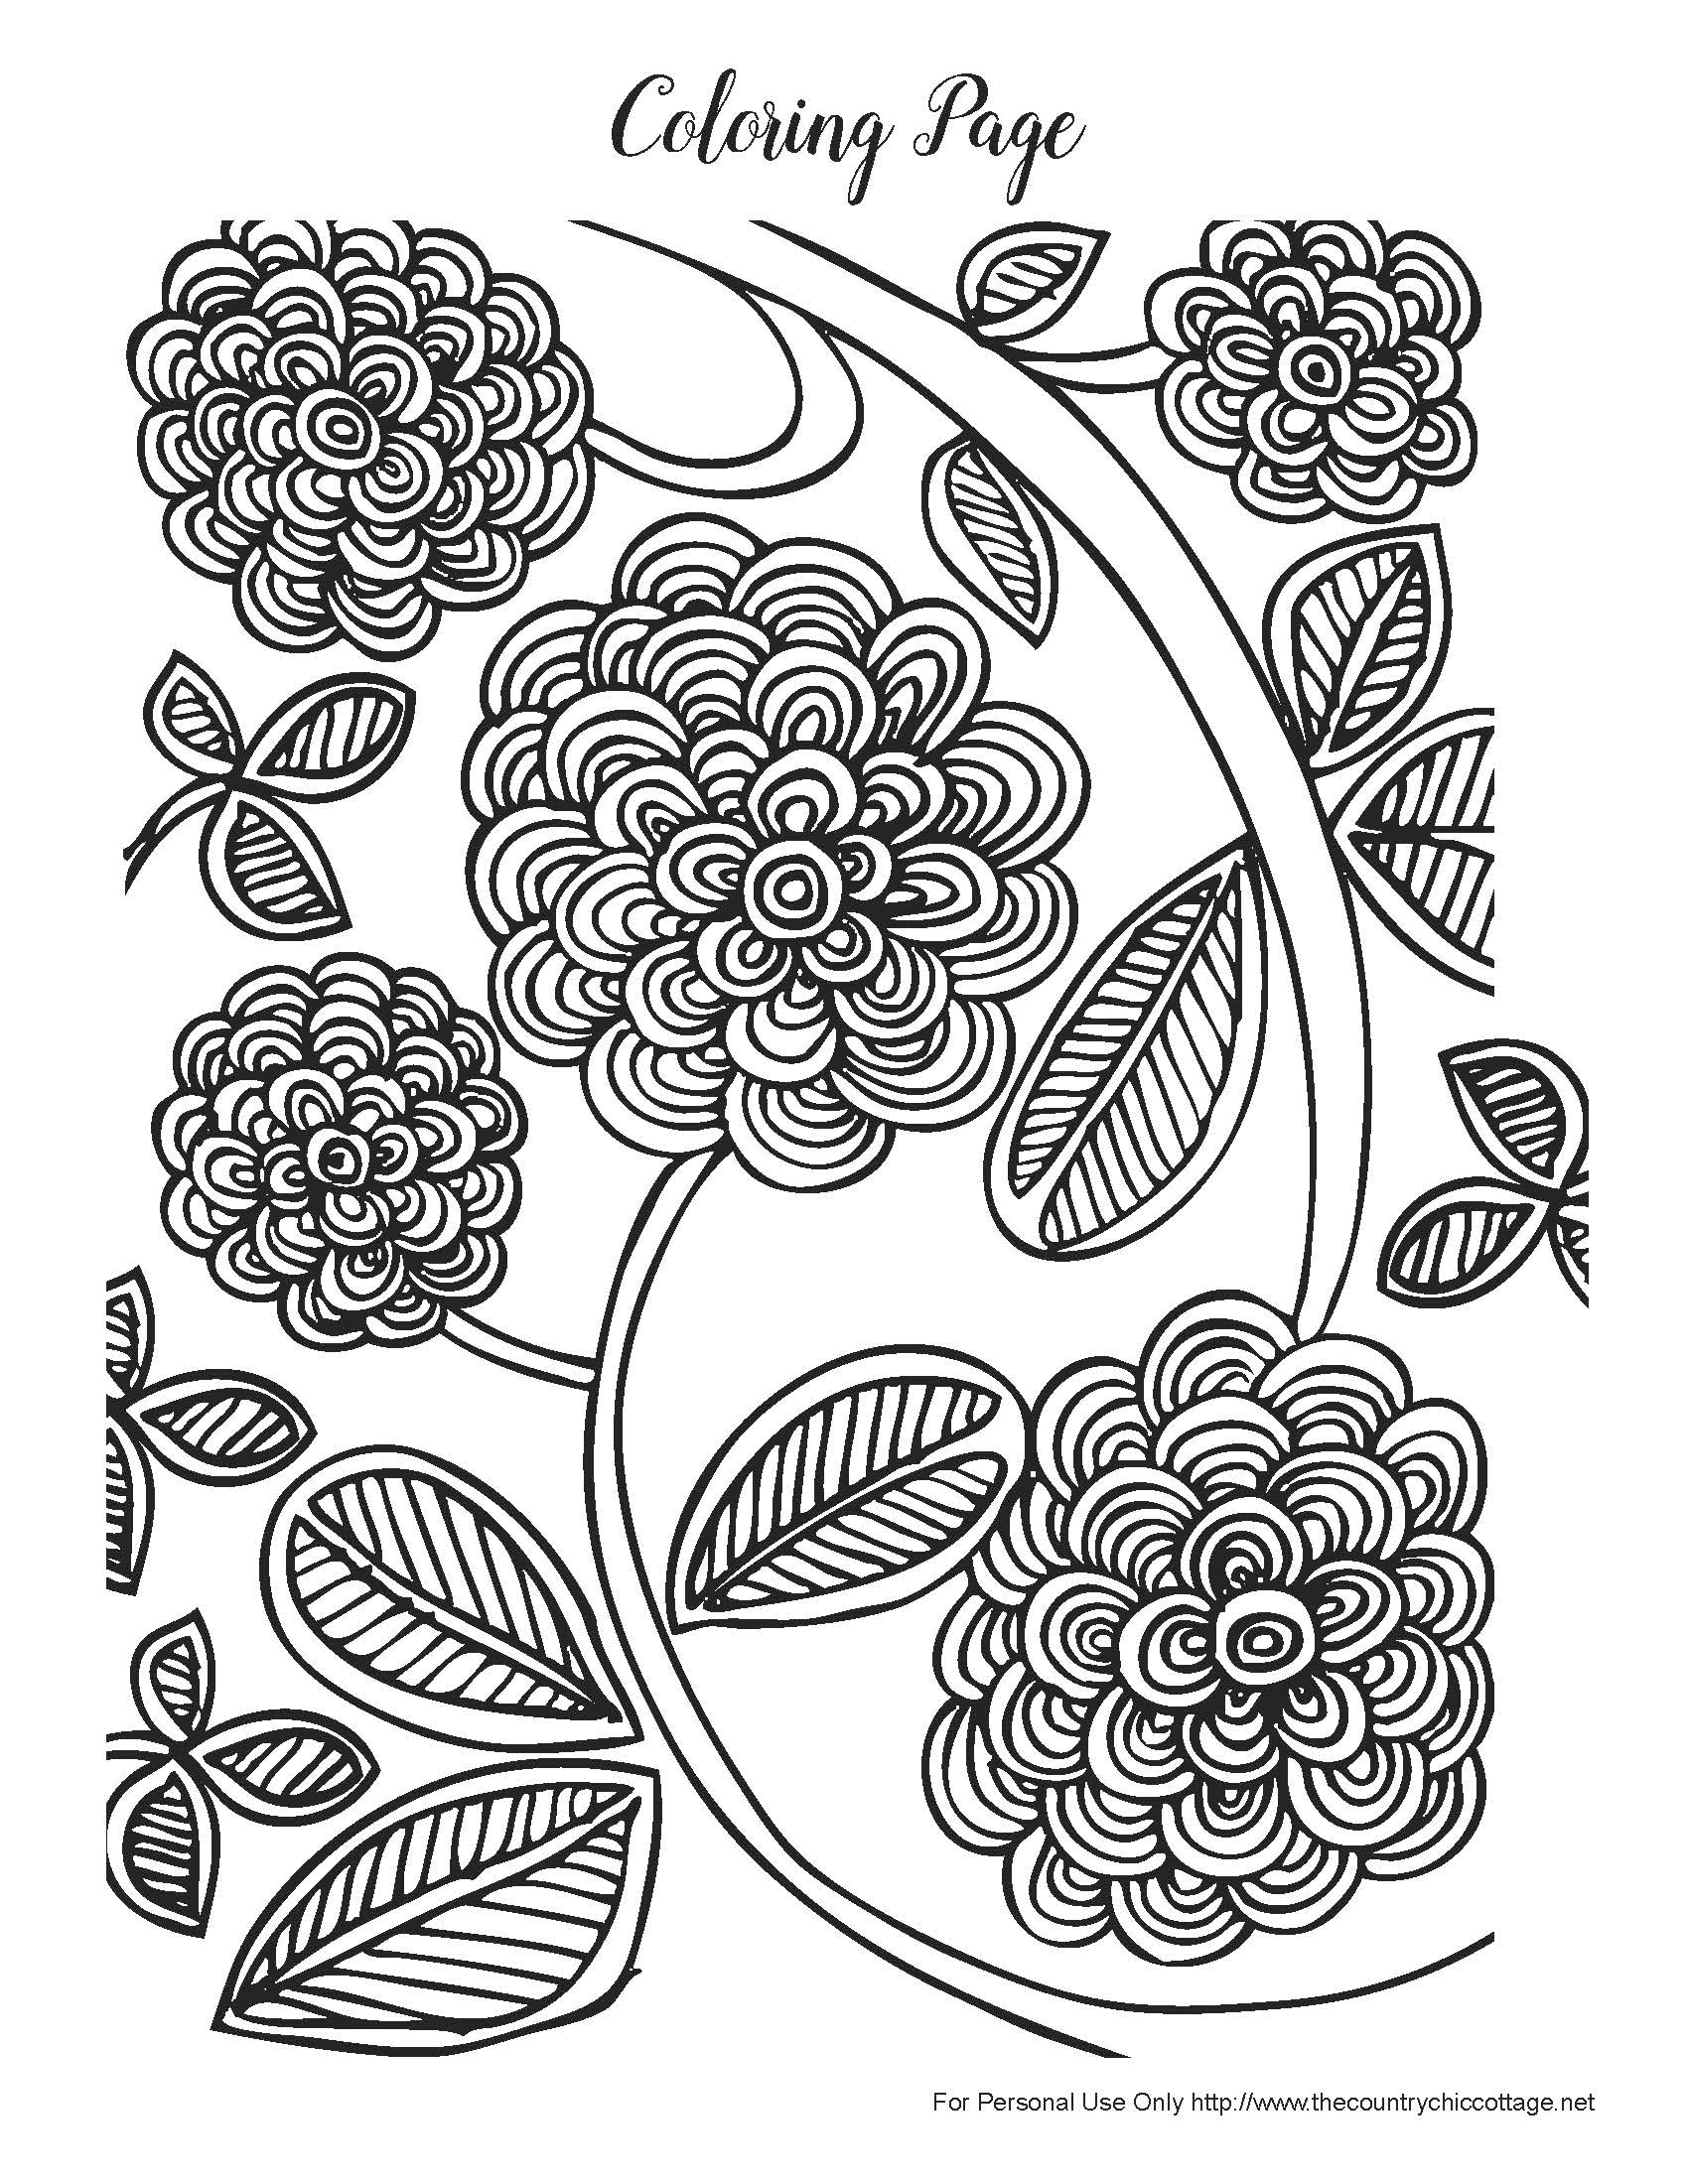 Spring Coloring Pages Free Spring Coloring Pages For Adults The Country Chic Cottage